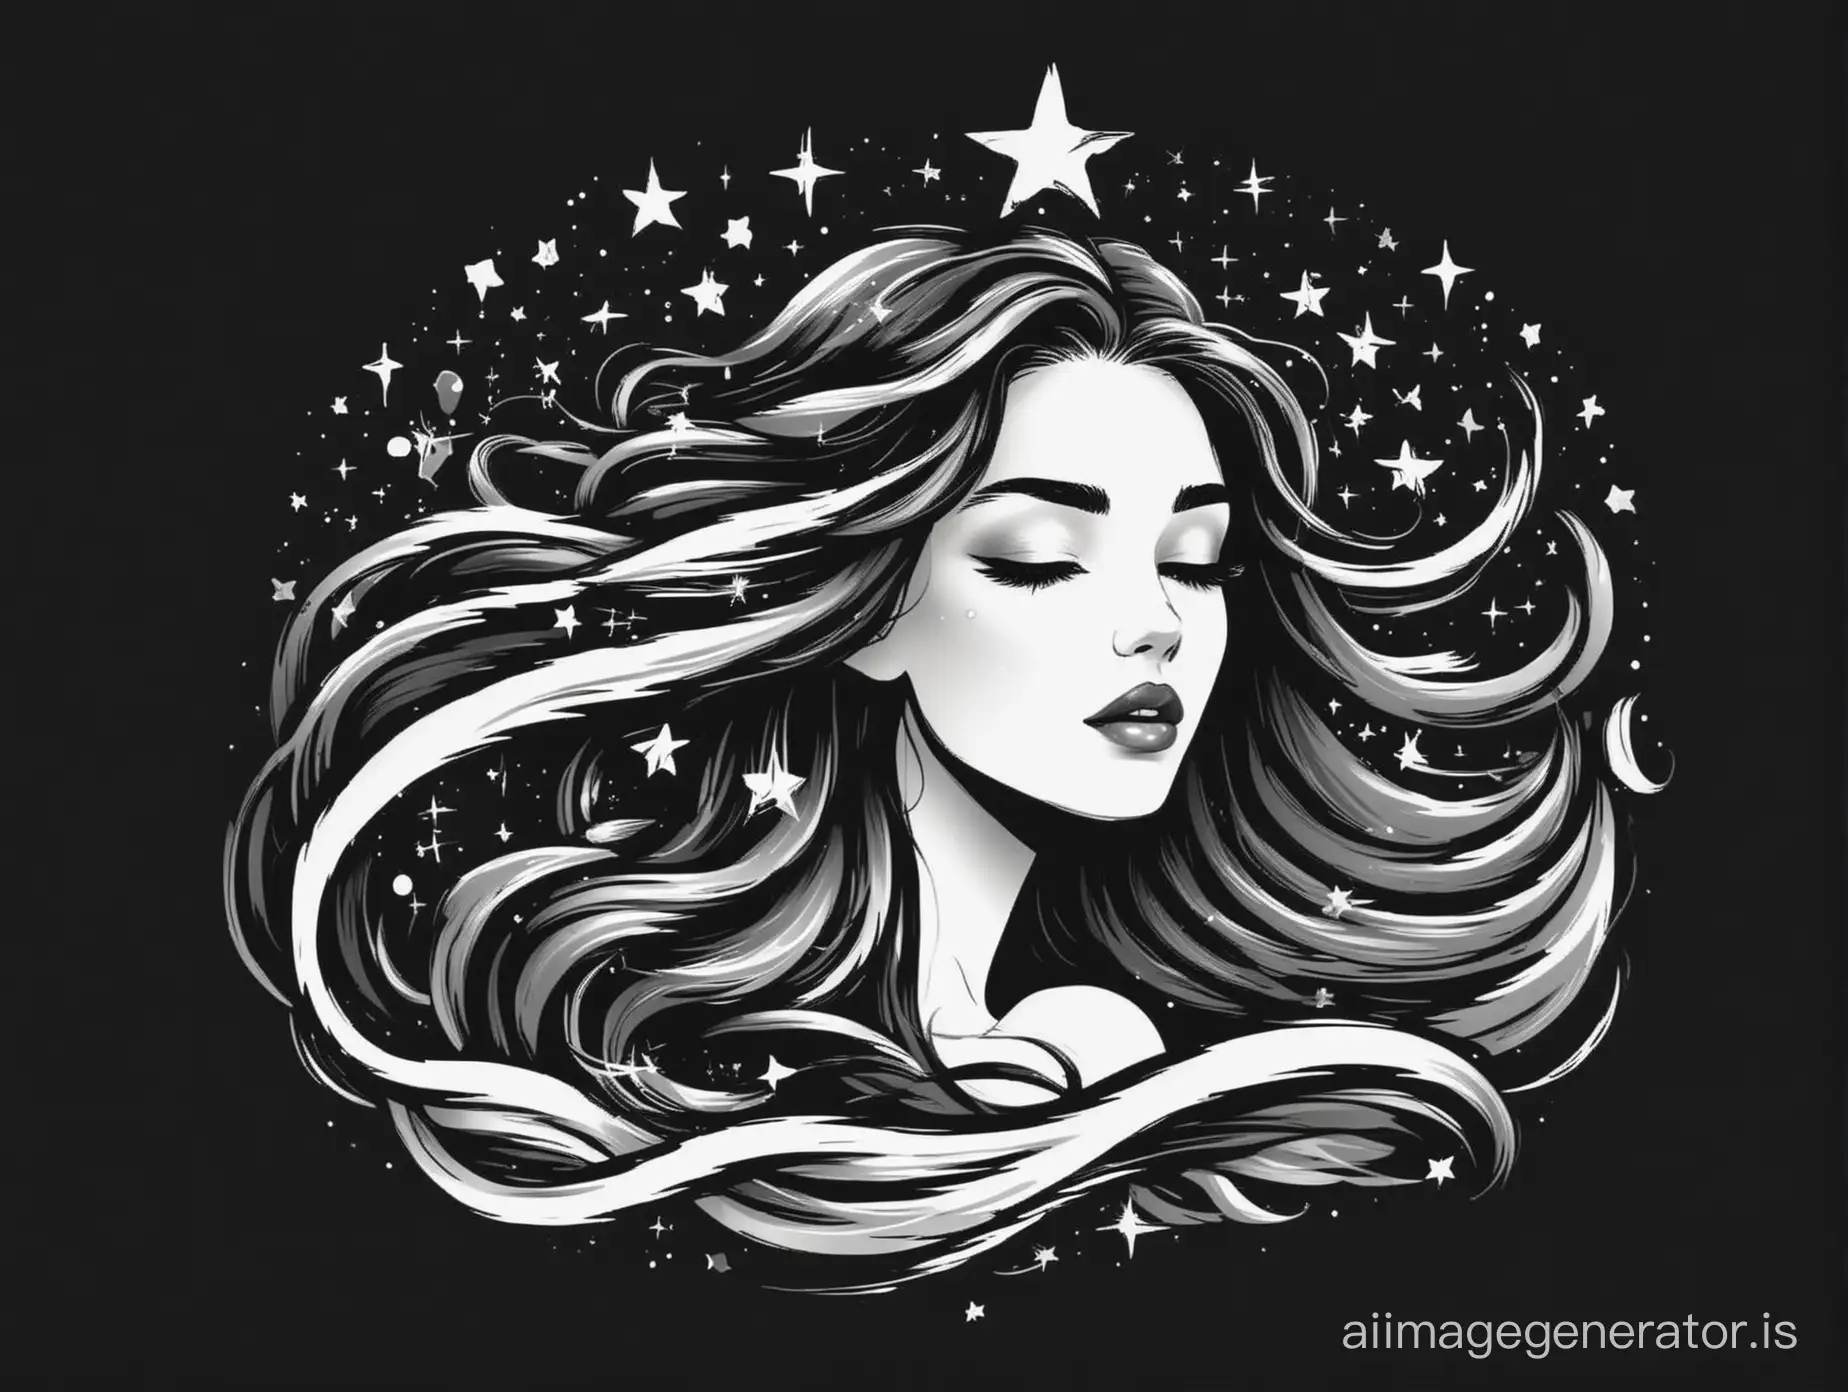 Elegant-Woman-Emblem-with-Flowing-Hair-and-Mystical-Stars-Minimalist-Black-and-White-Illustration